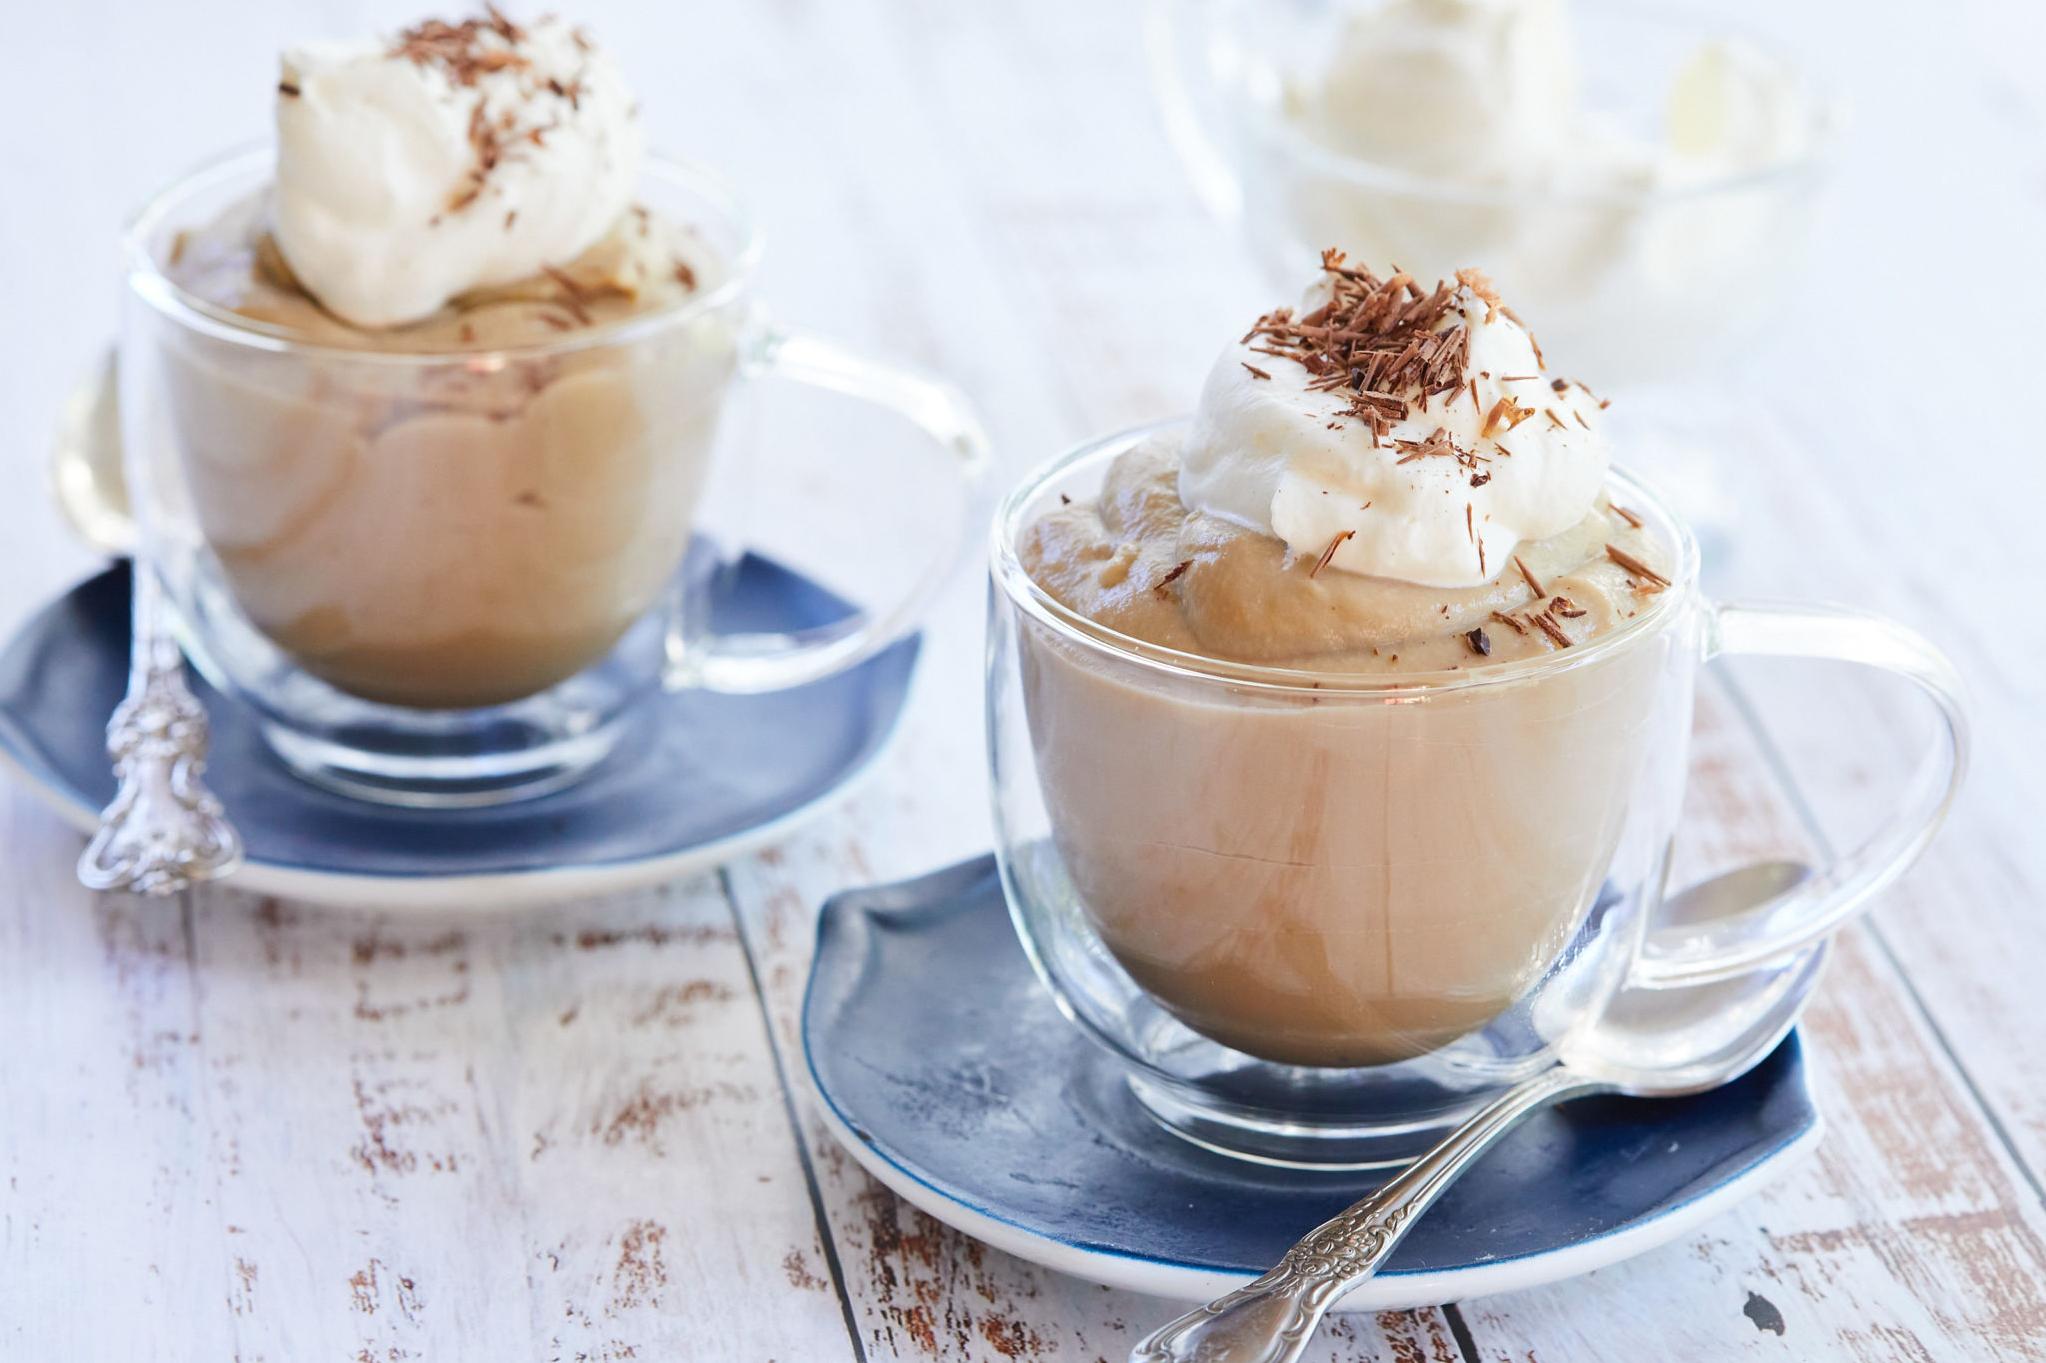  Indulge in a chocolate lover's dream with these coffee-infused pudding cups